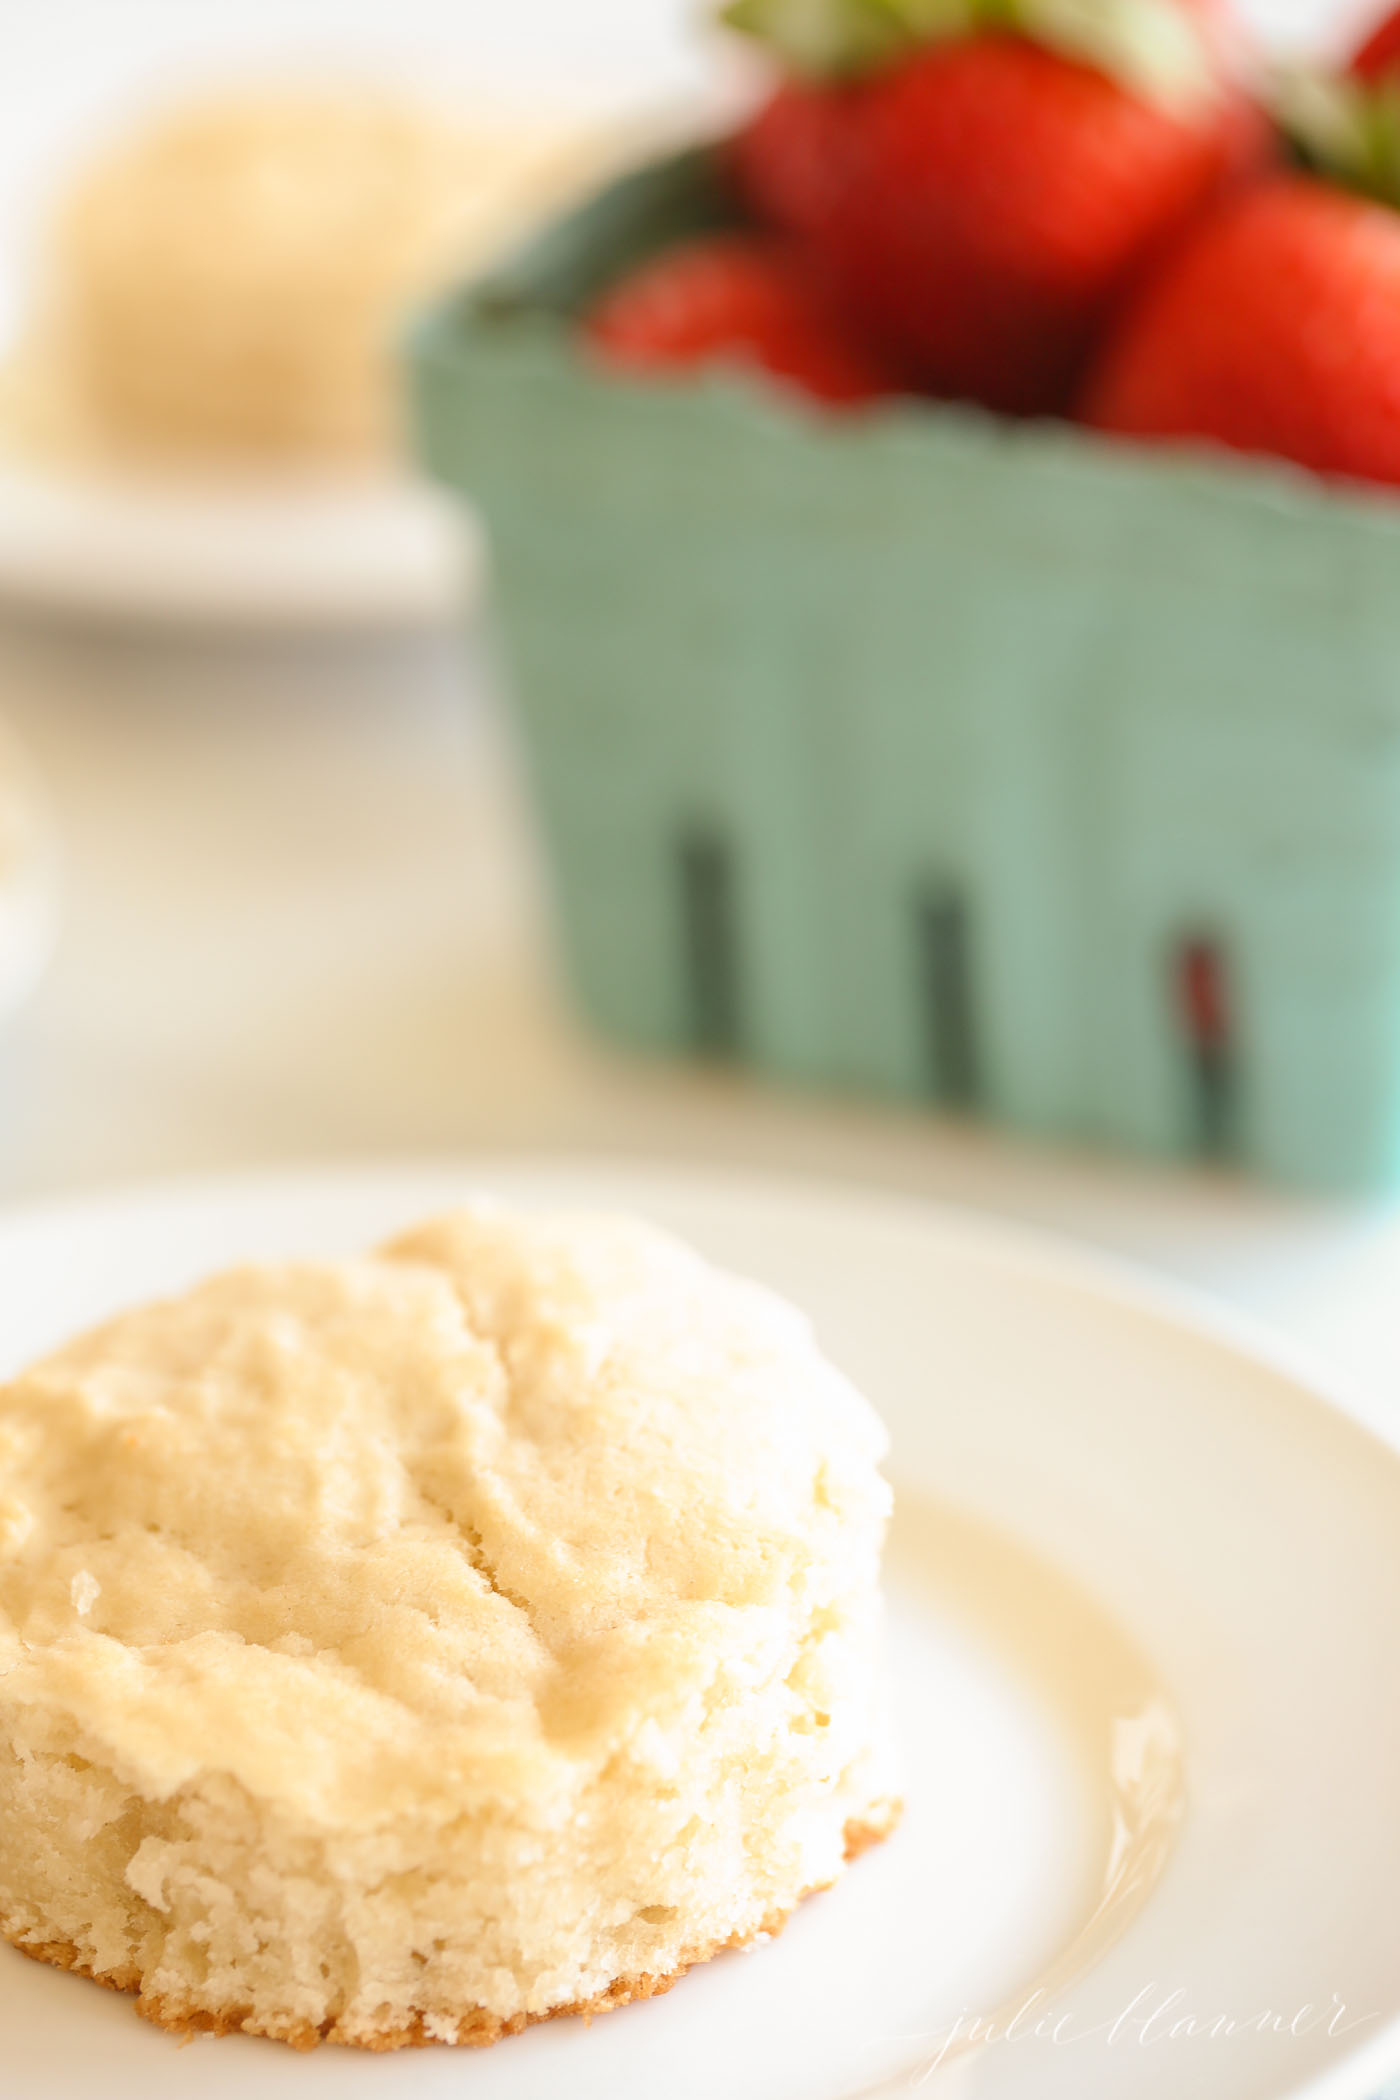 A biscuit and a box of strawberries in the background for a strawberry shortcake recipe.